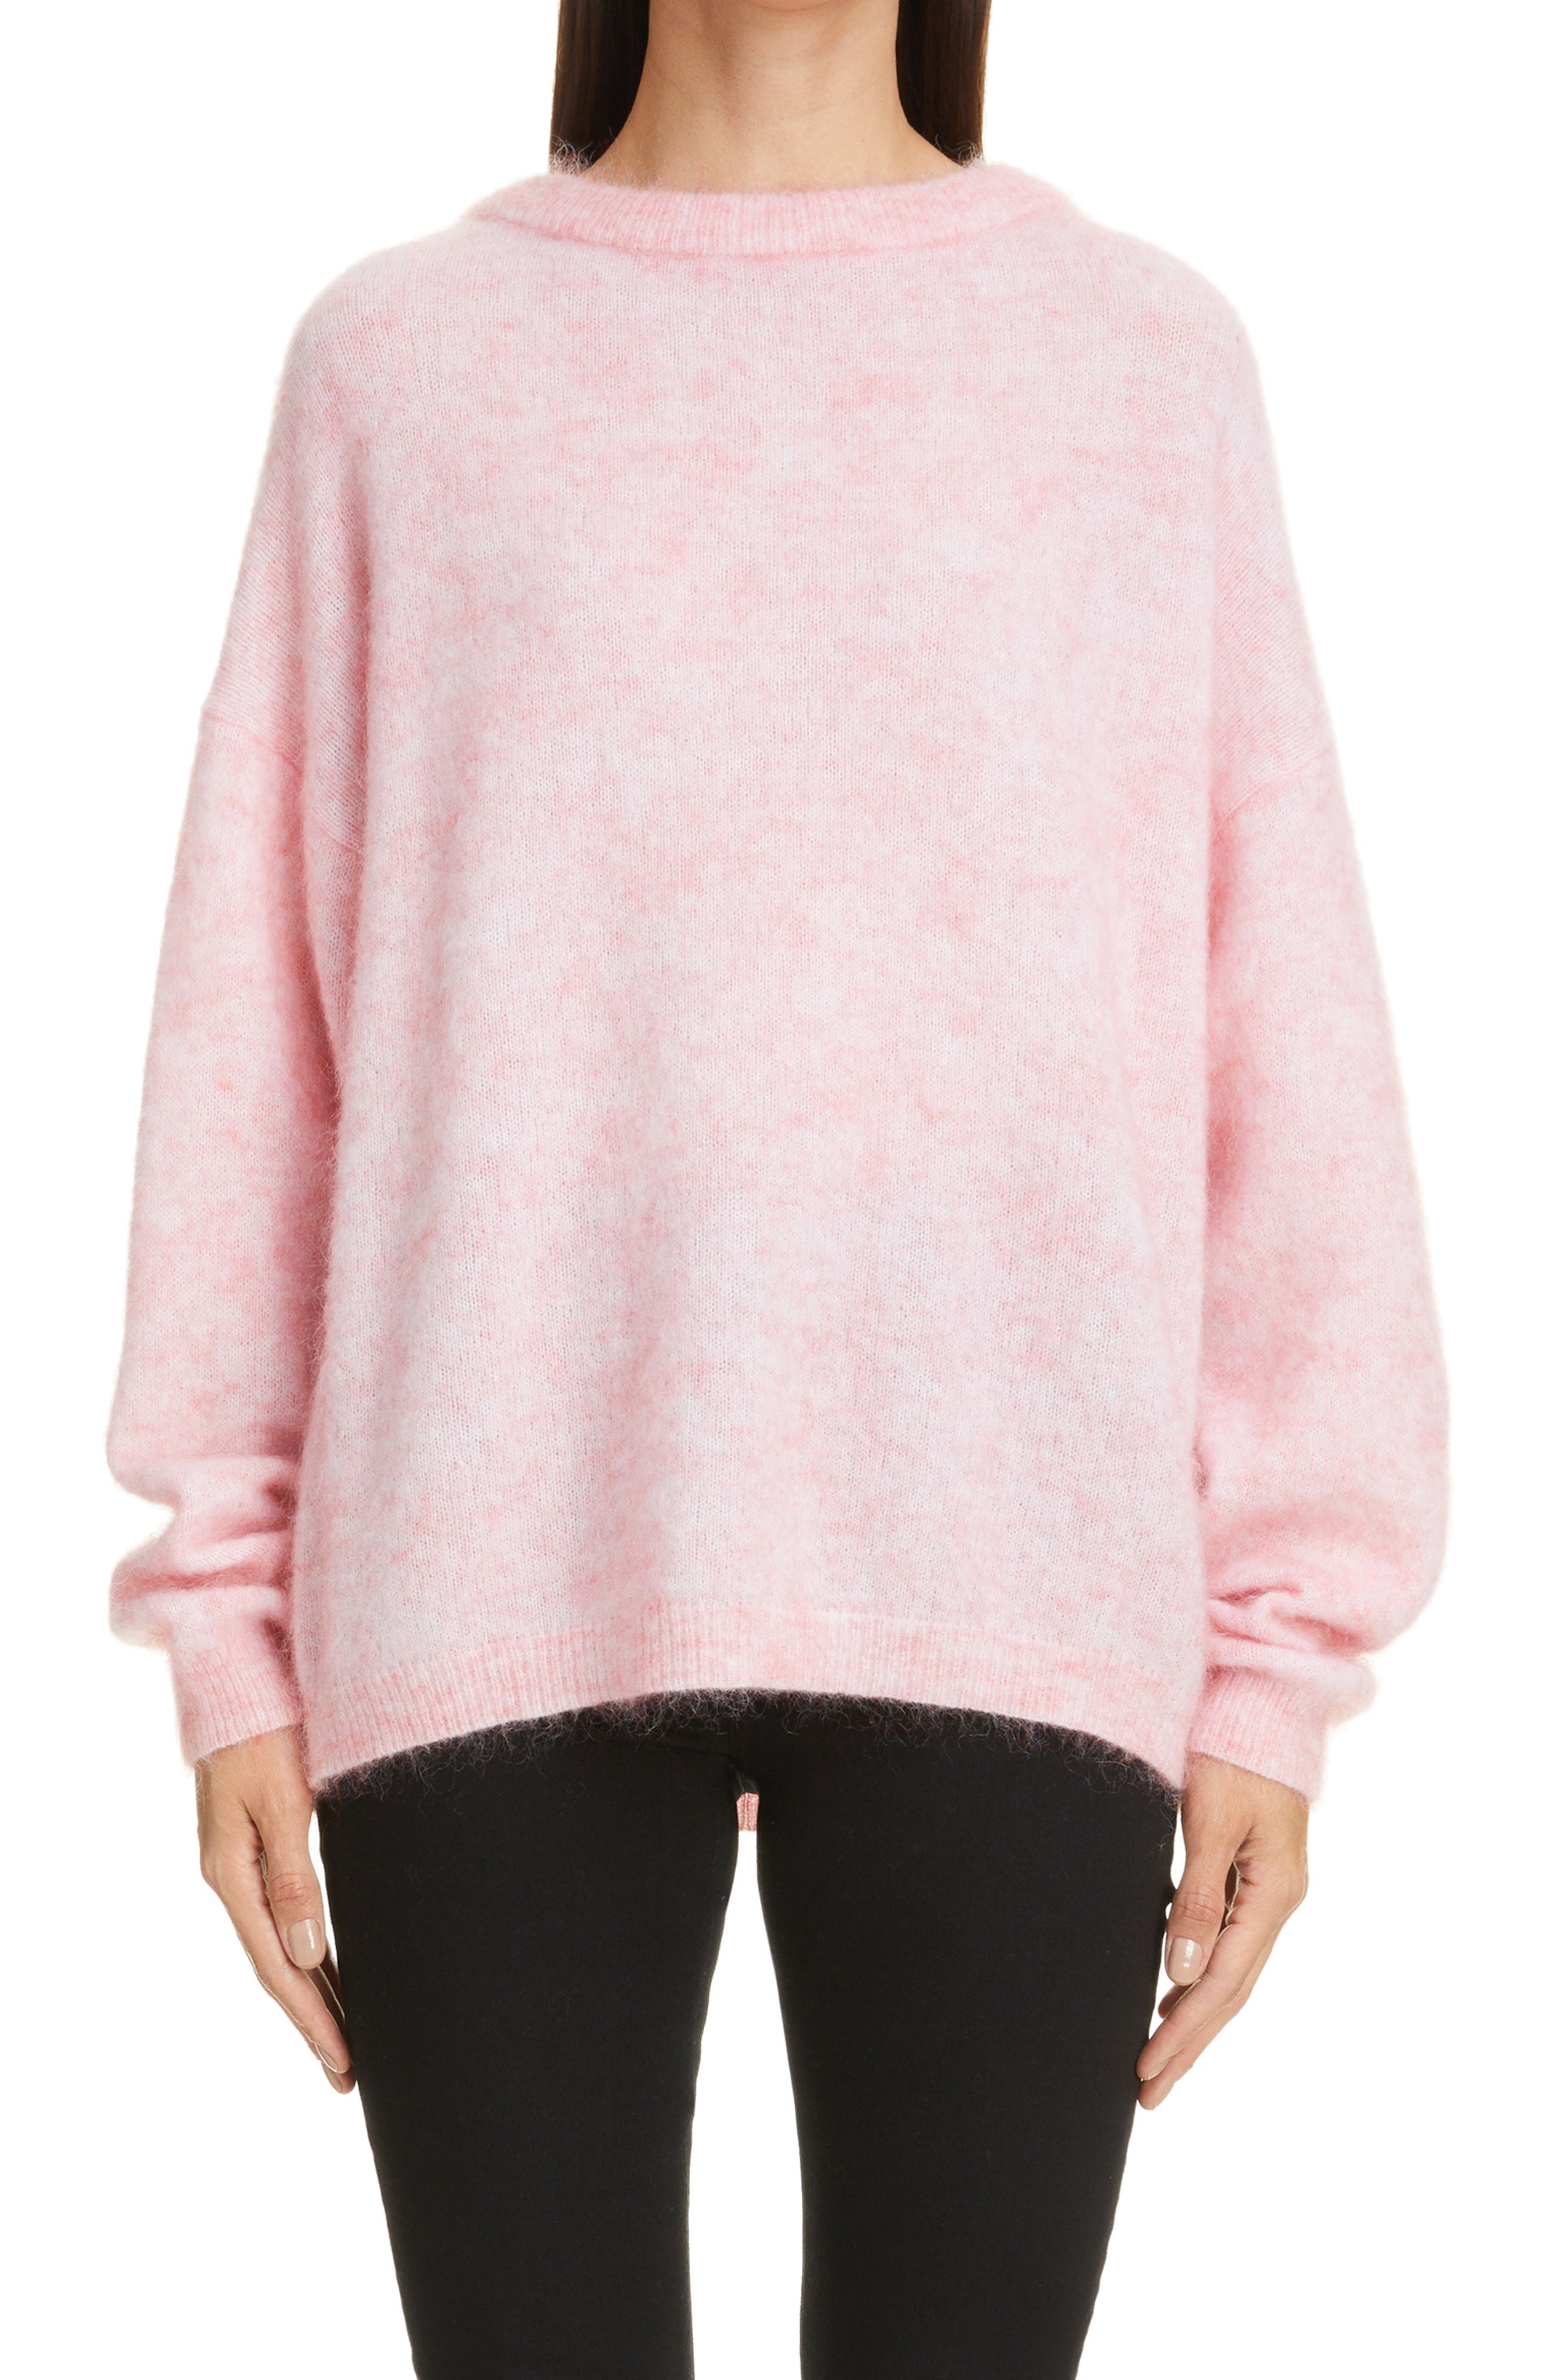 Acne Studios Dramatic Moh Sweater in Rose Pink at Nordstrom, Size Large